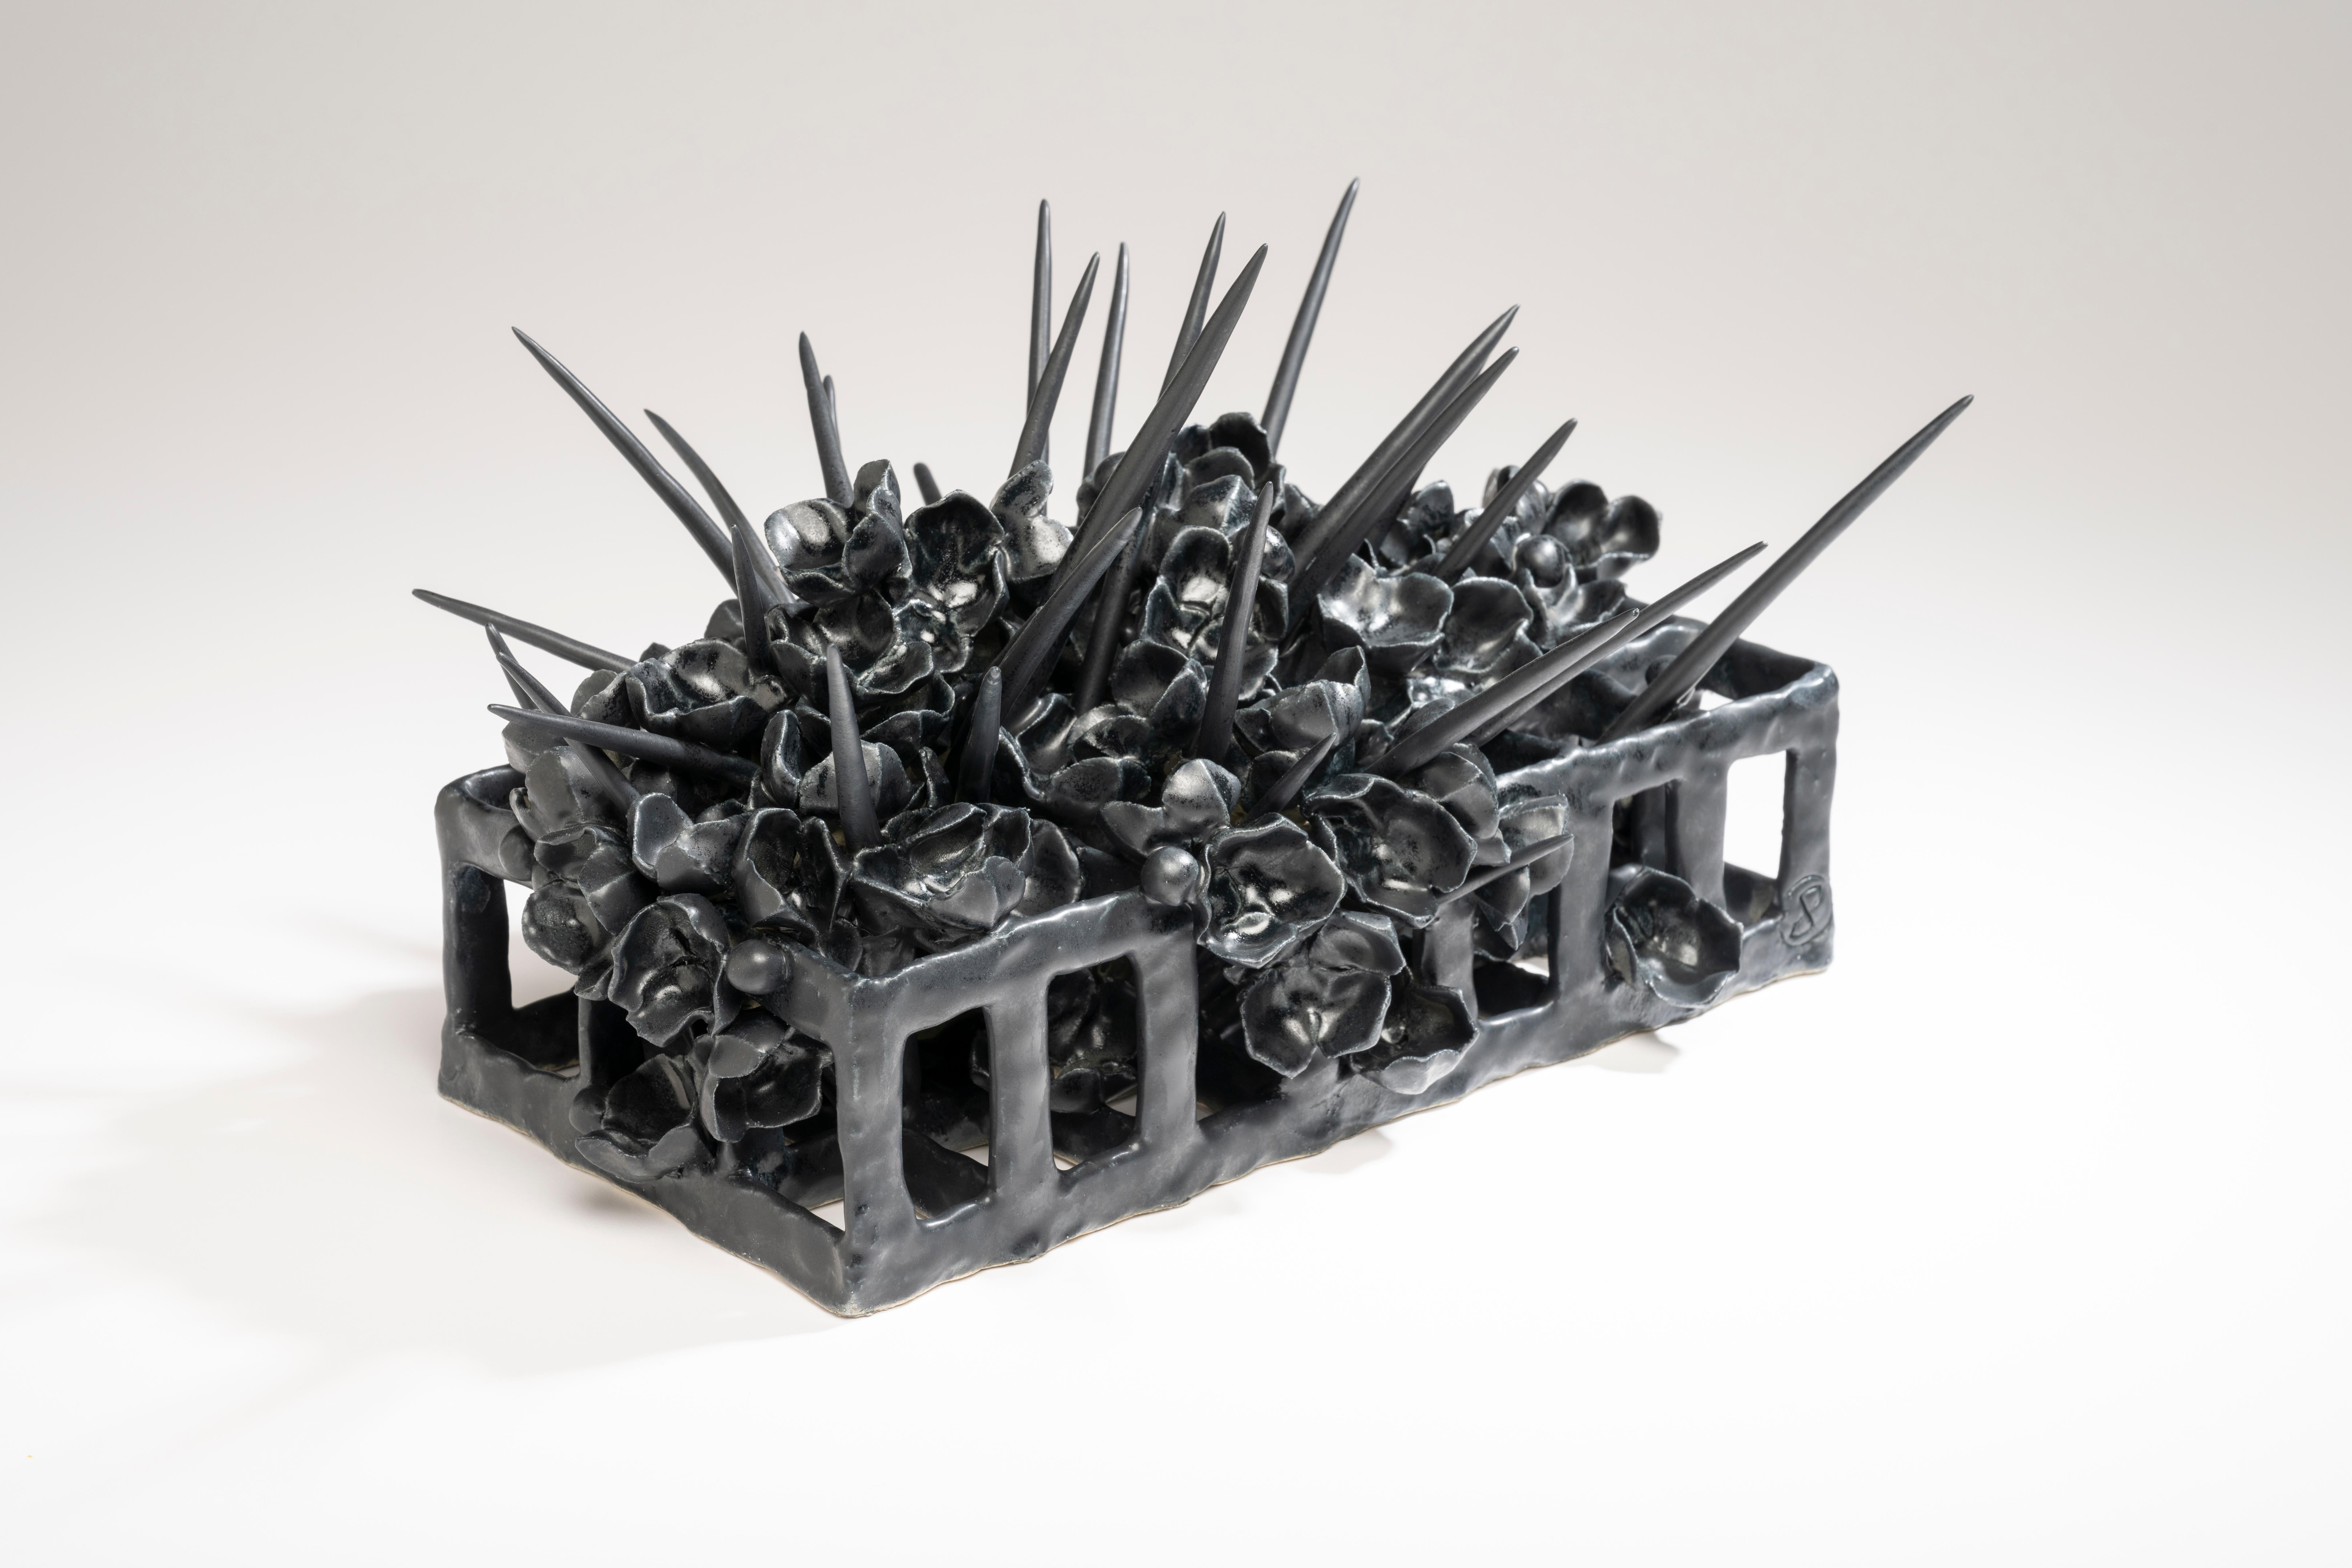 Joanna Poag Binding Time (Black Grid with Quills) Ceramic Sculpture, 2021 In Excellent Condition For Sale In New York, NY